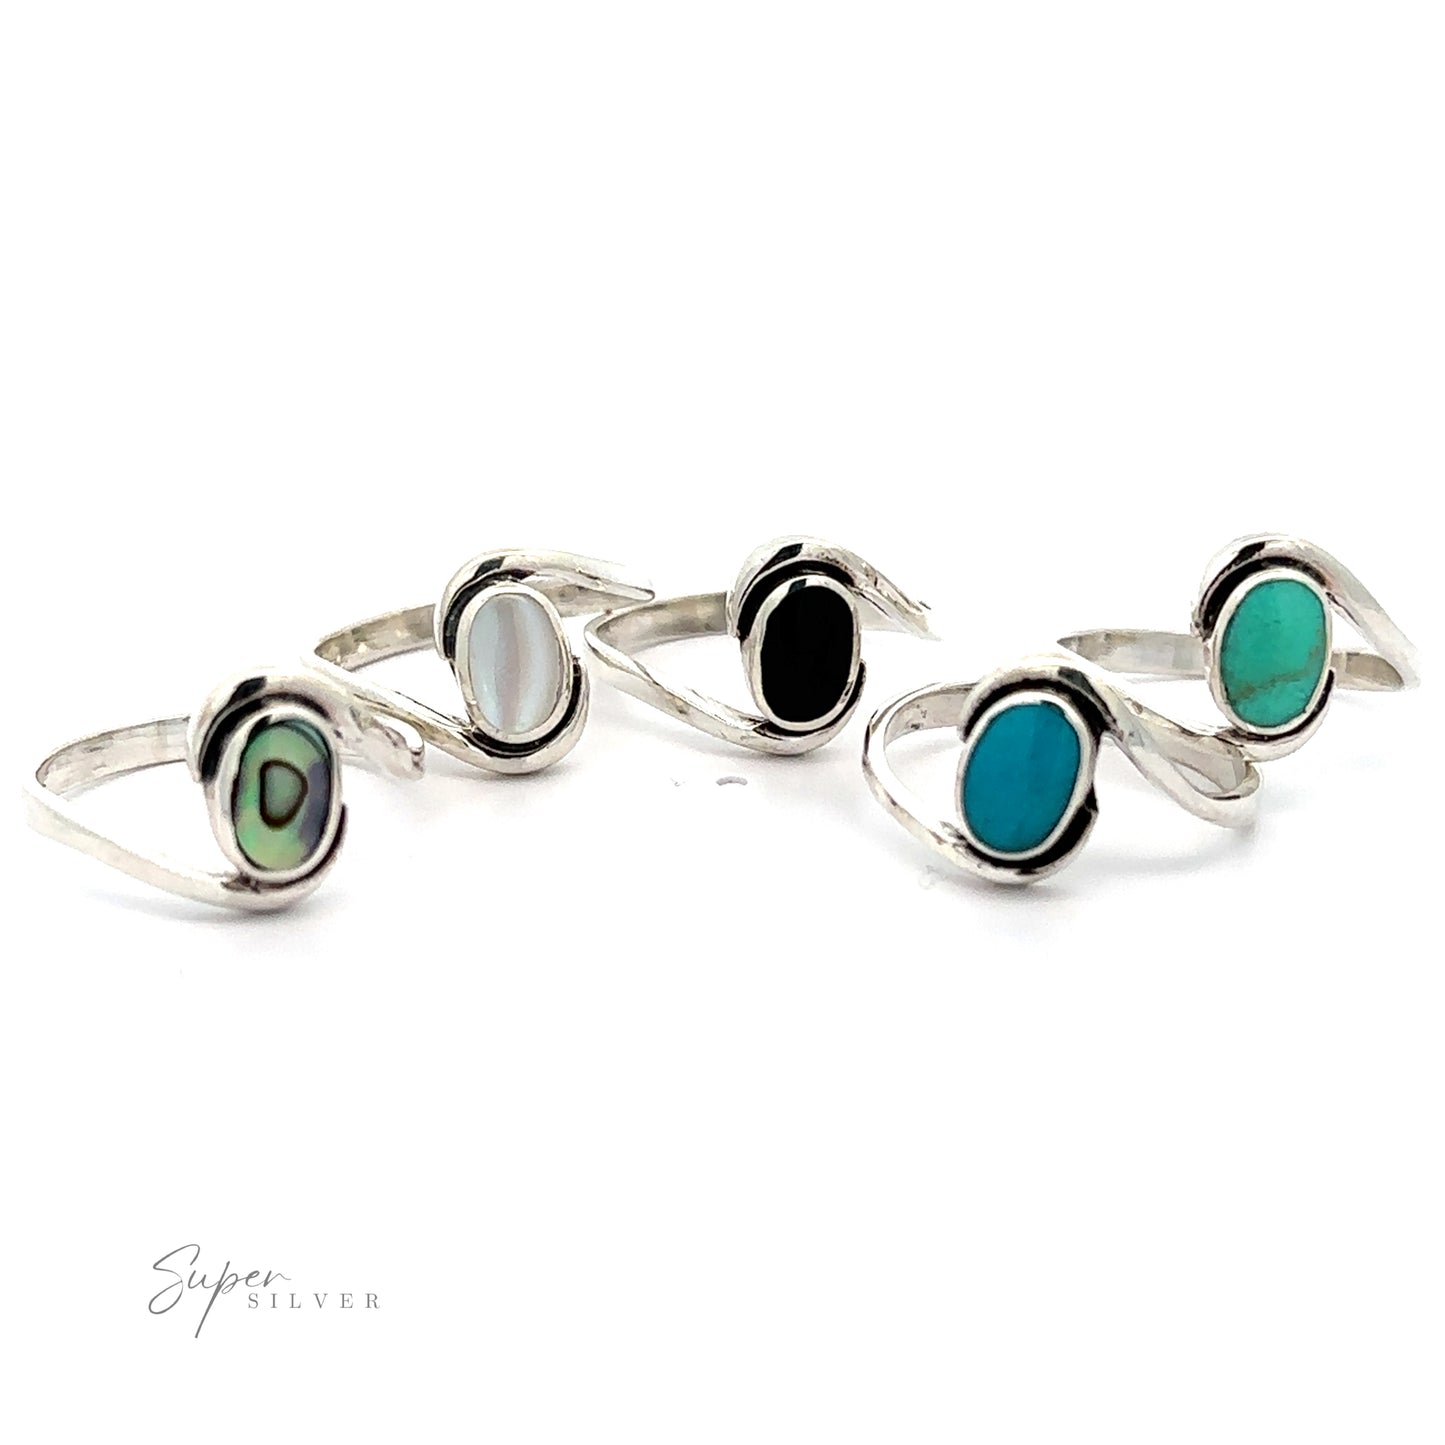 A collection of four exquisite Simple Freeform Rings with Oval Inlaid Stones accents.